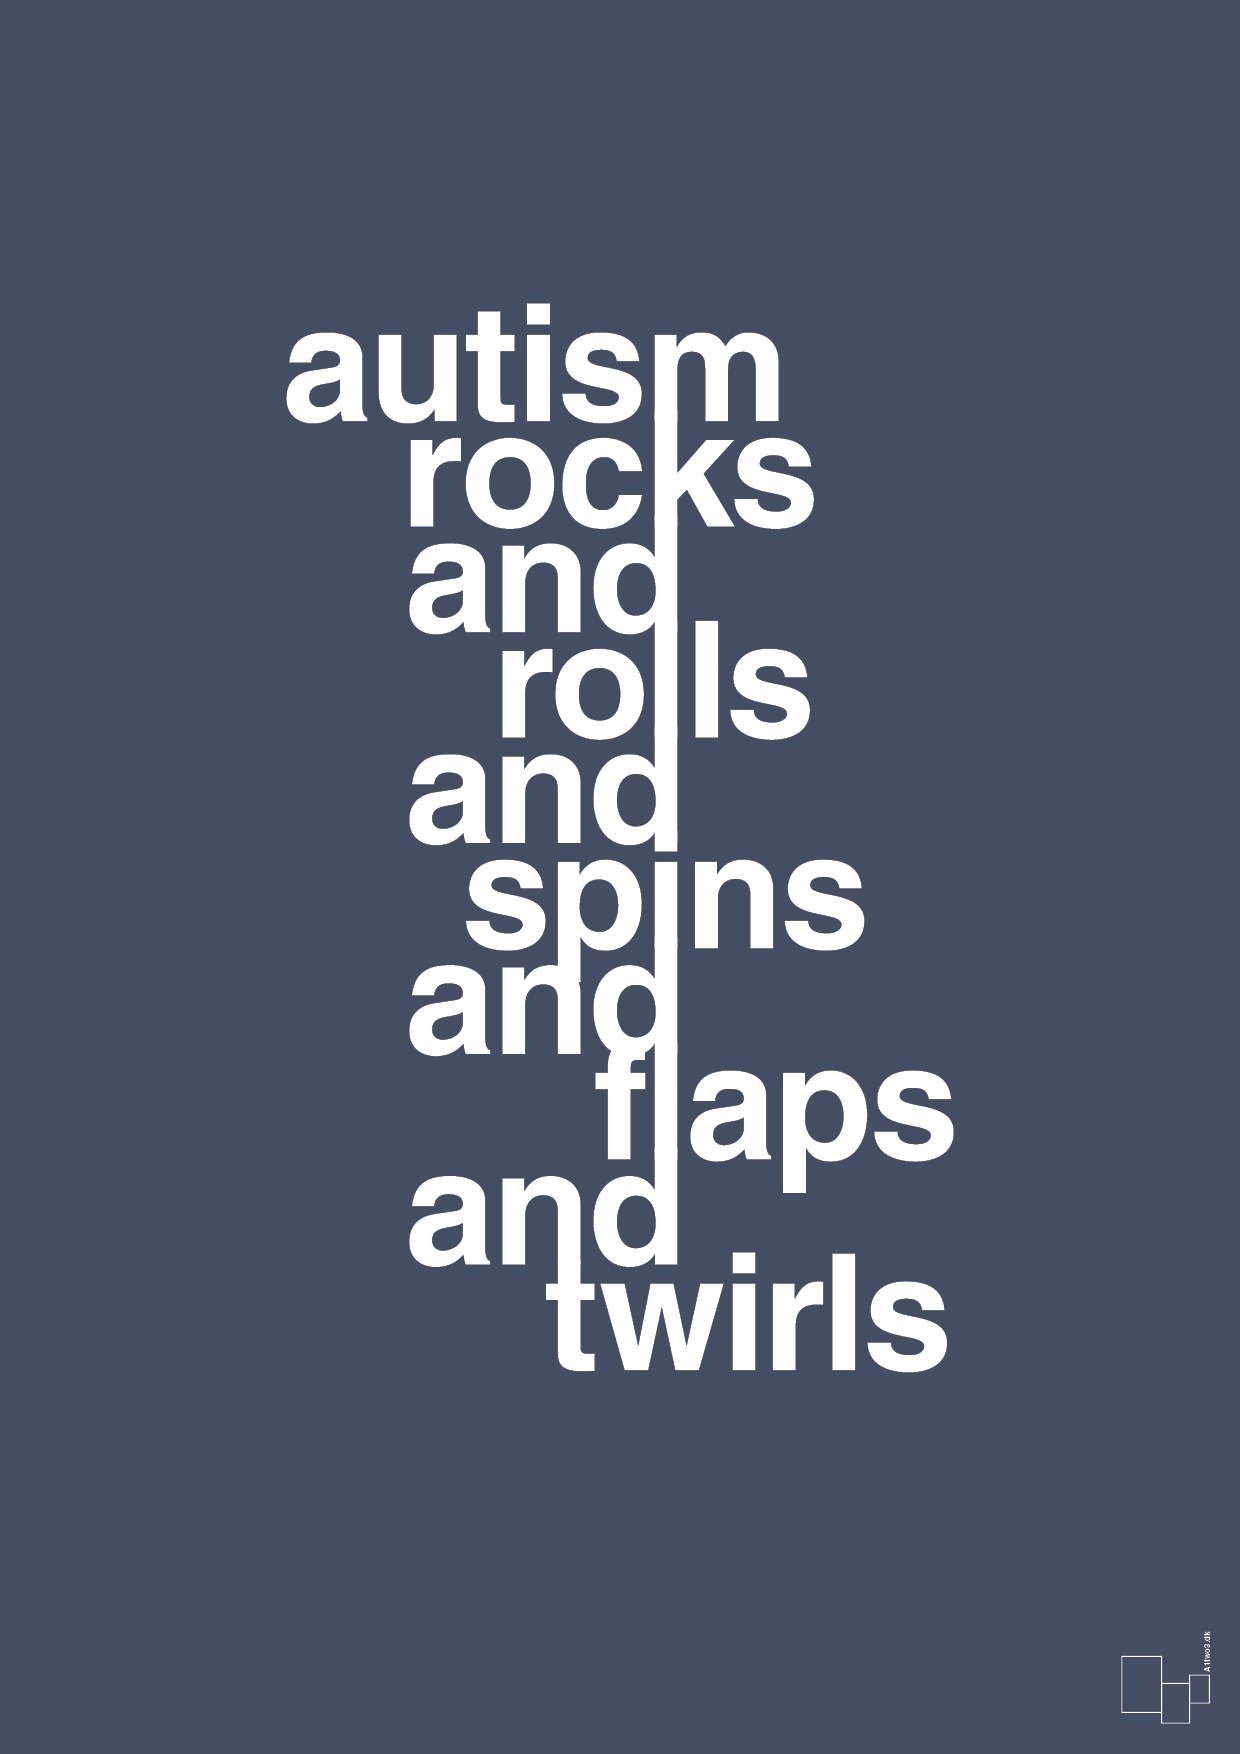 autism rocks and rolls and spins and flaps and twirls - Plakat med Samfund i Petrol